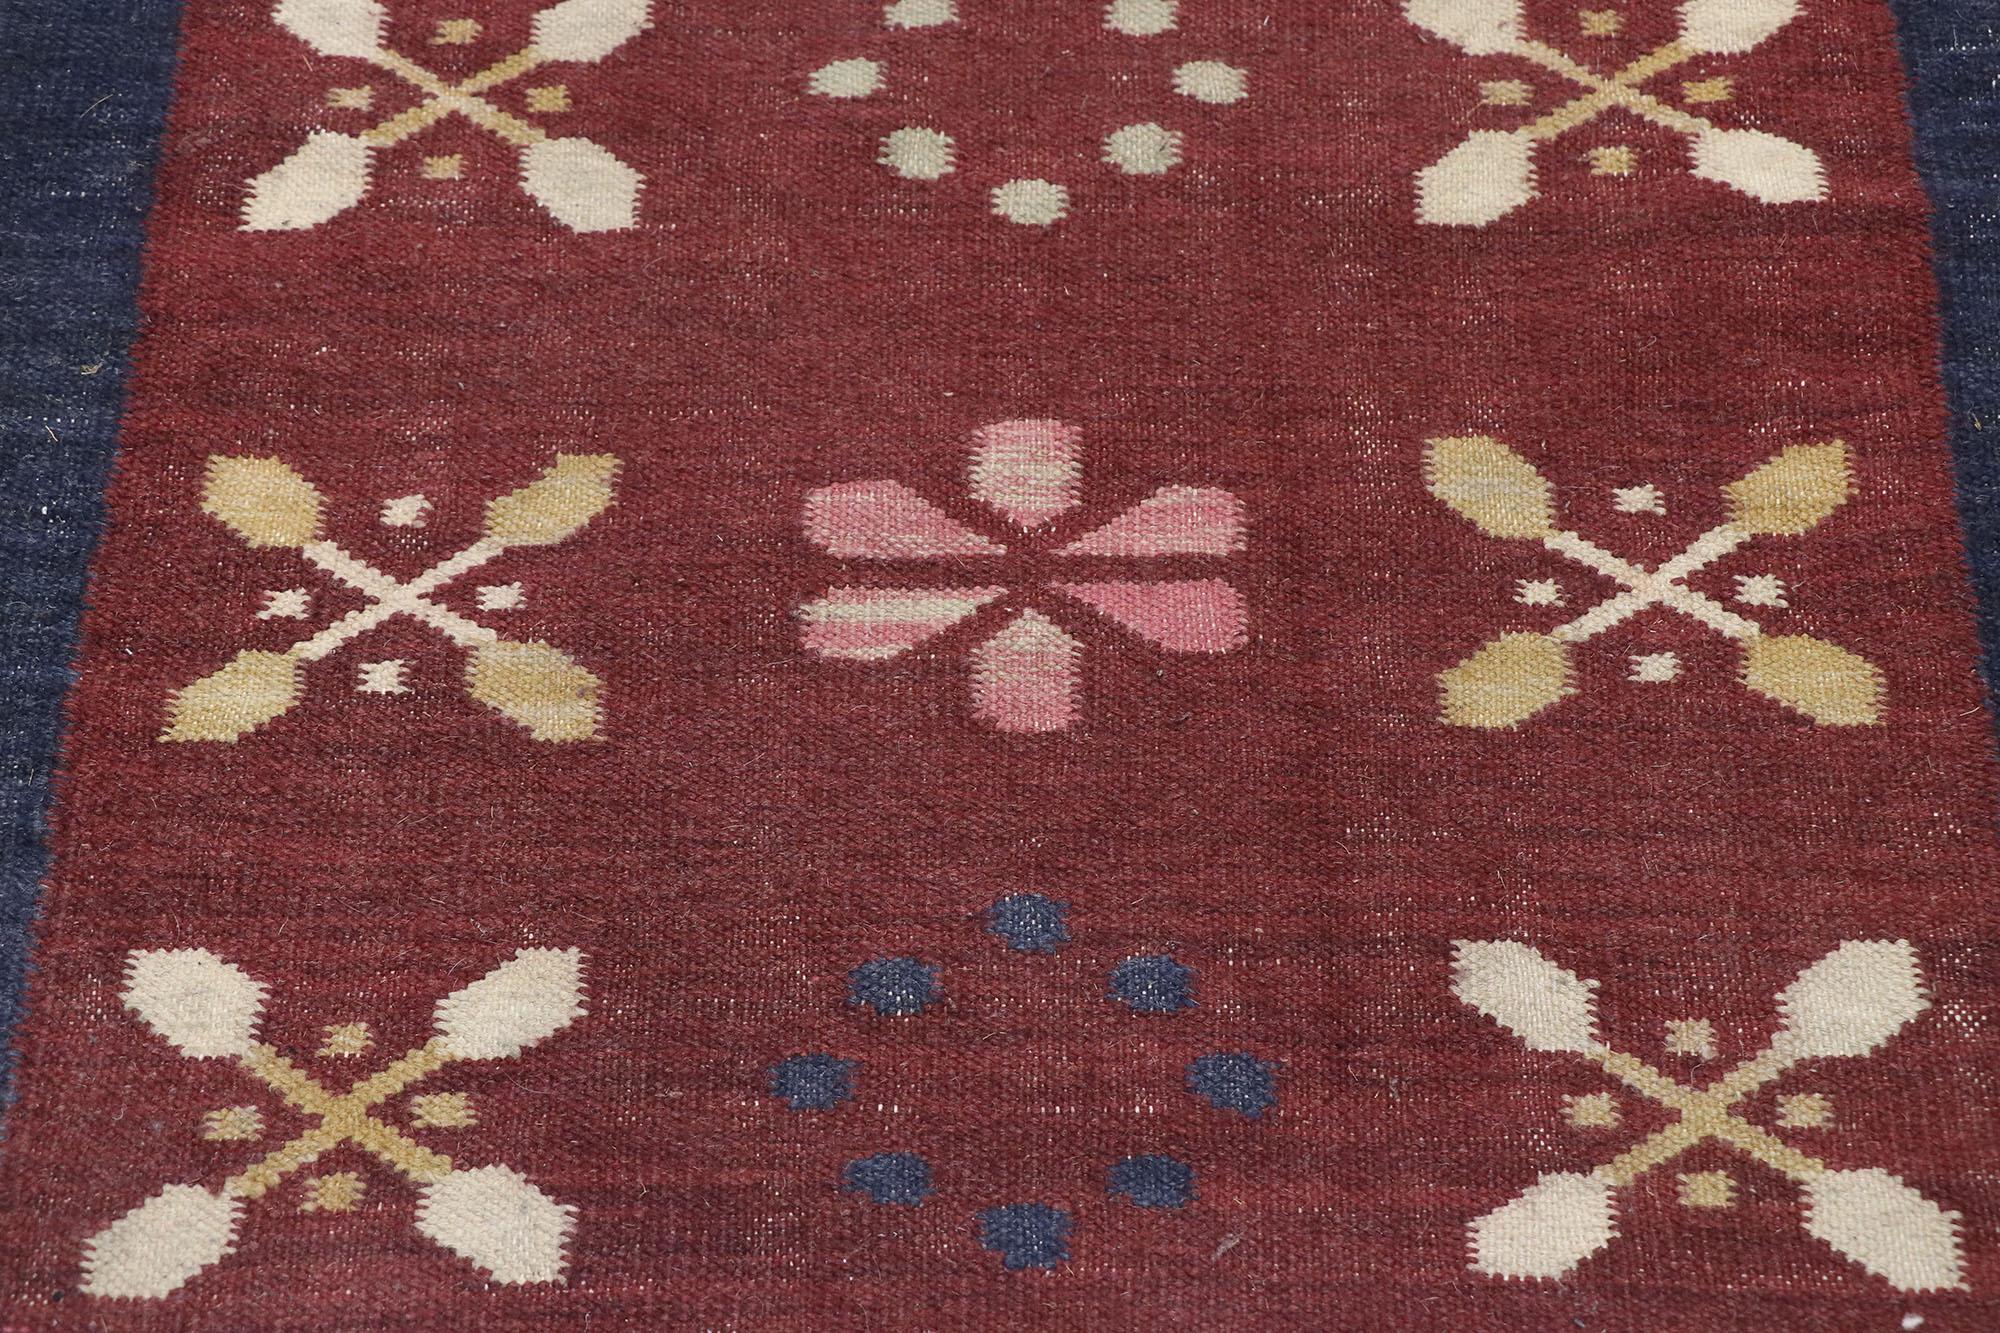 Hand-Woven Vintage Romanian Floral Kilim Rug with Boho Chic Farmhouse Style